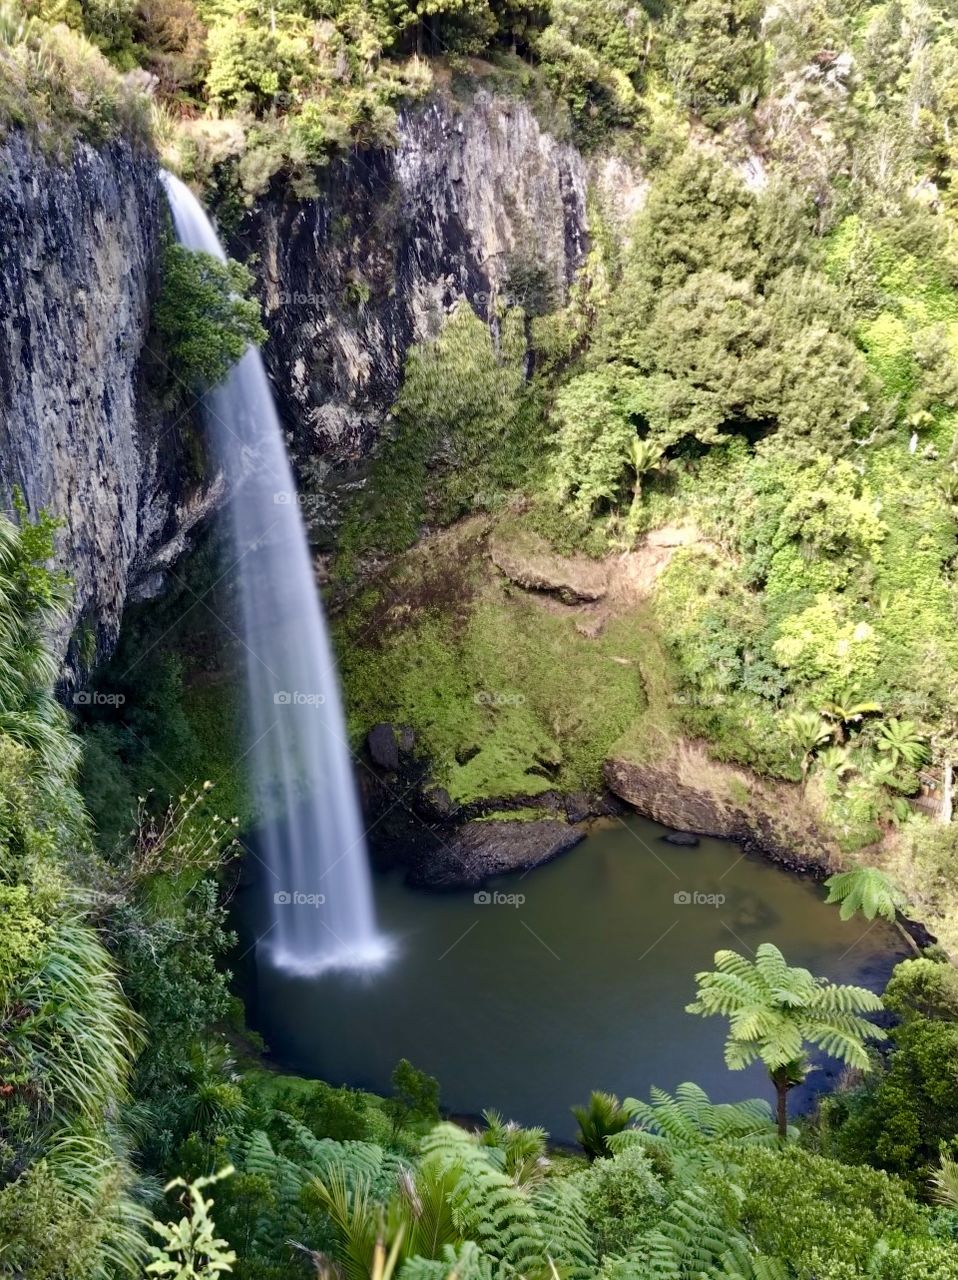 The aptly named Bridal Veil Falls surrounded by lush green bush